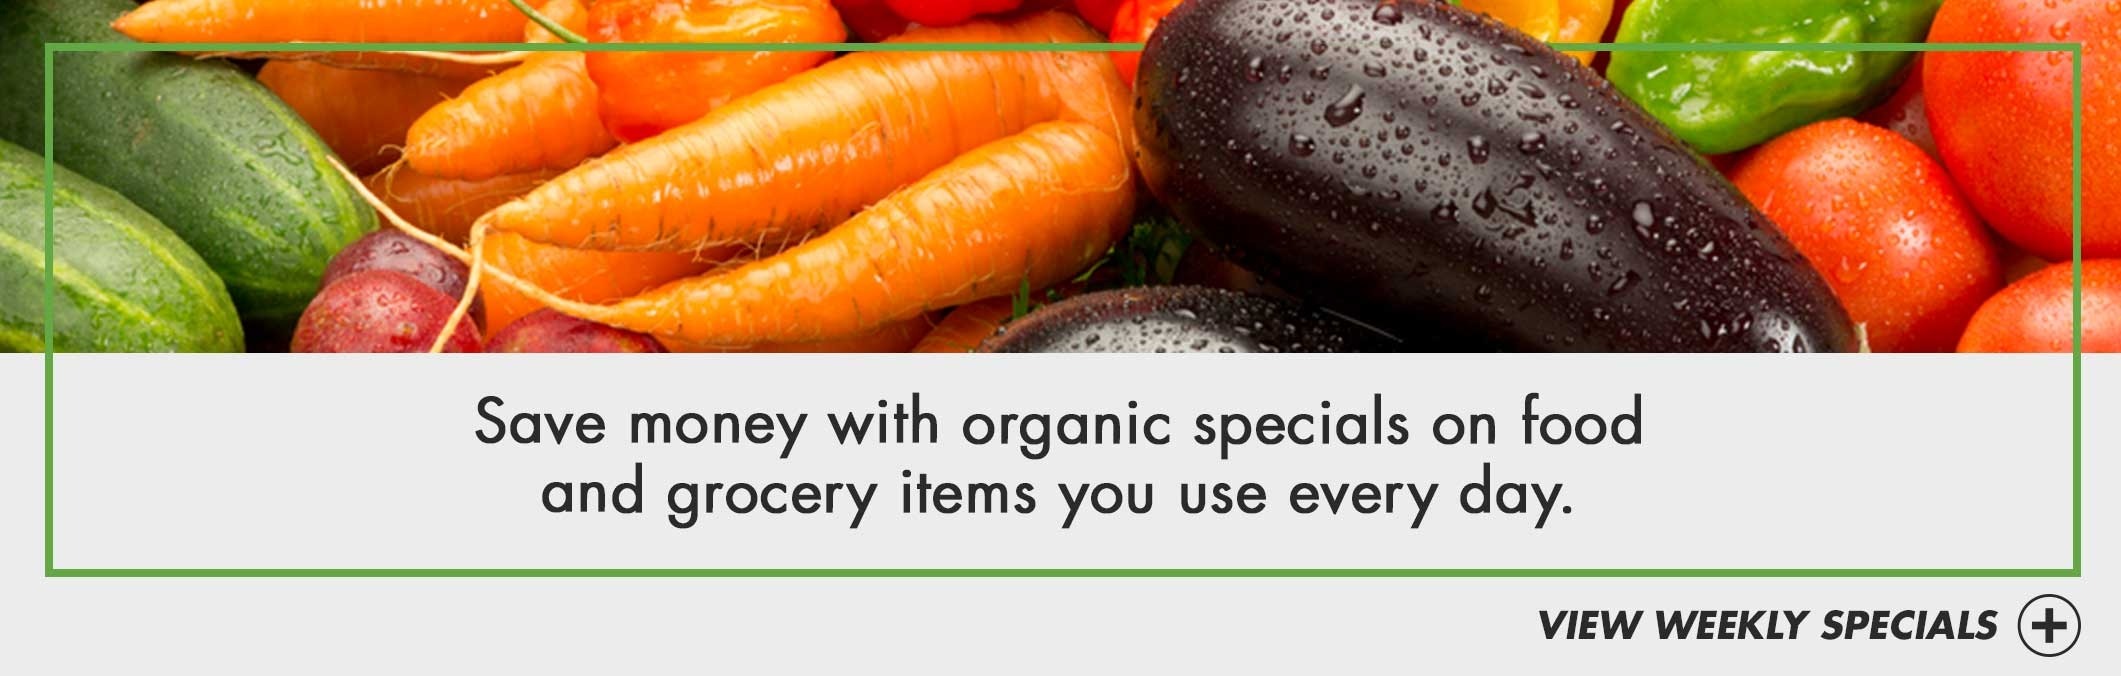 Save money with Organic specials on food and grocery items you use every day.